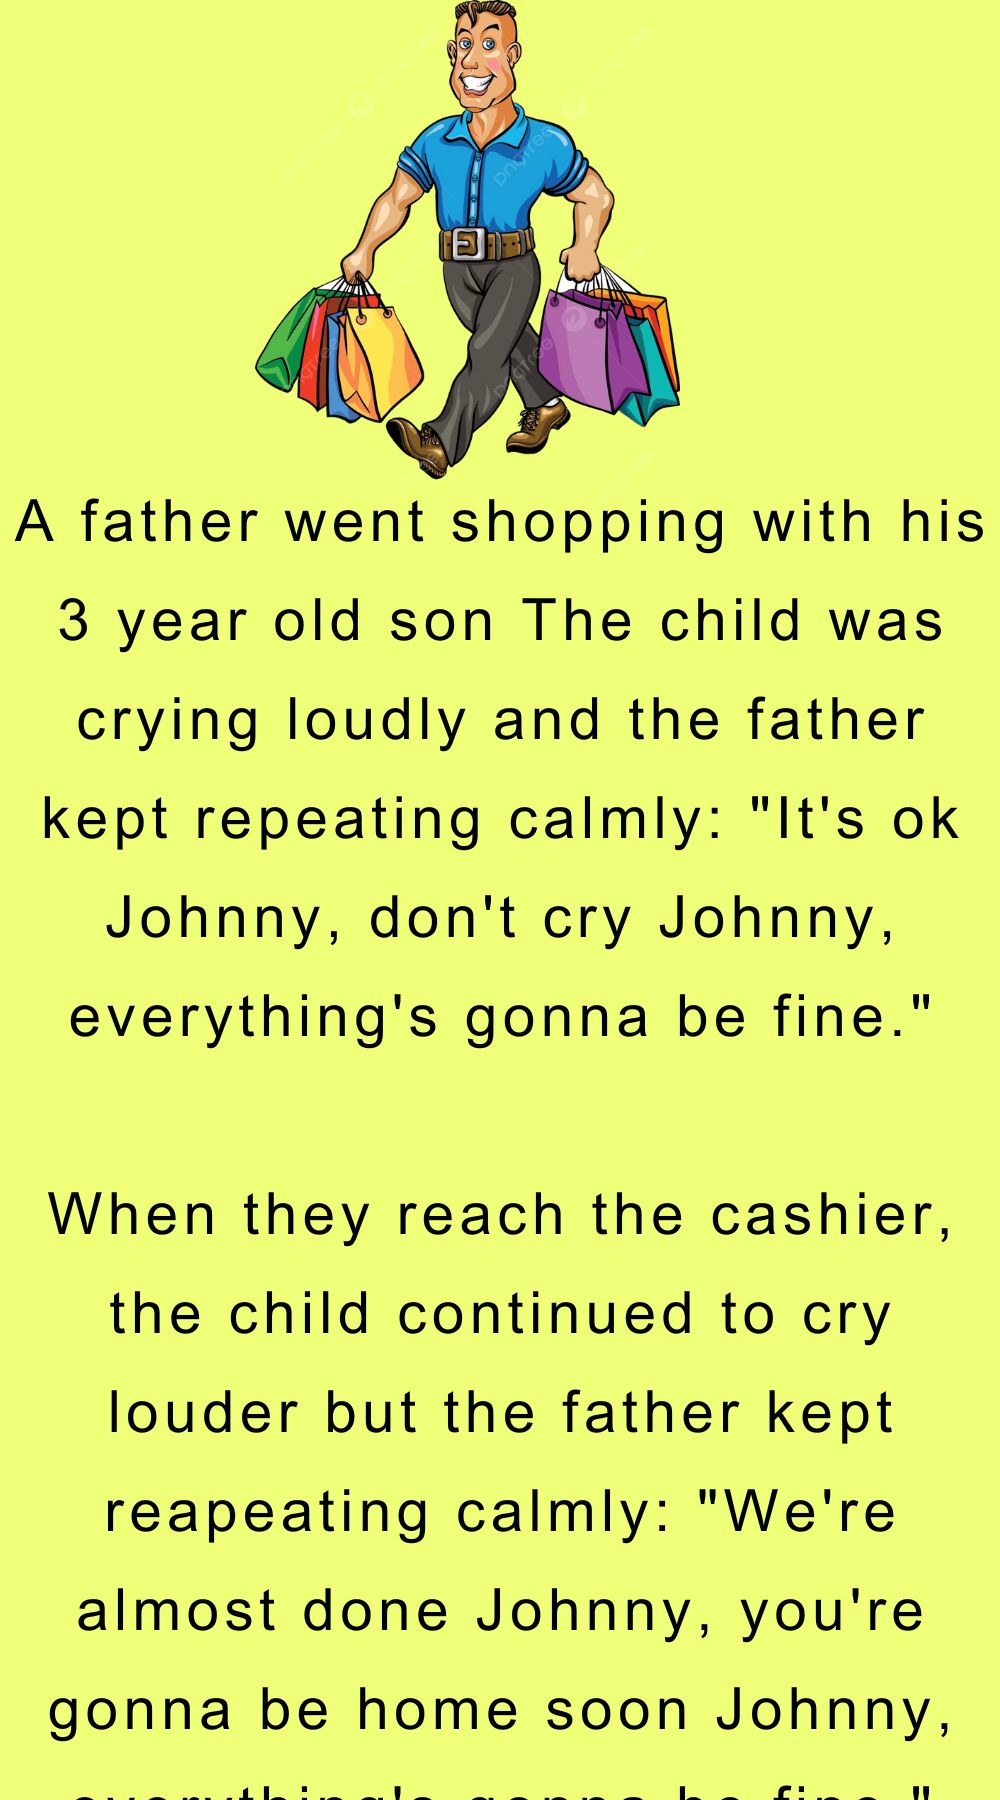 A father went shopping with his 3 year old son